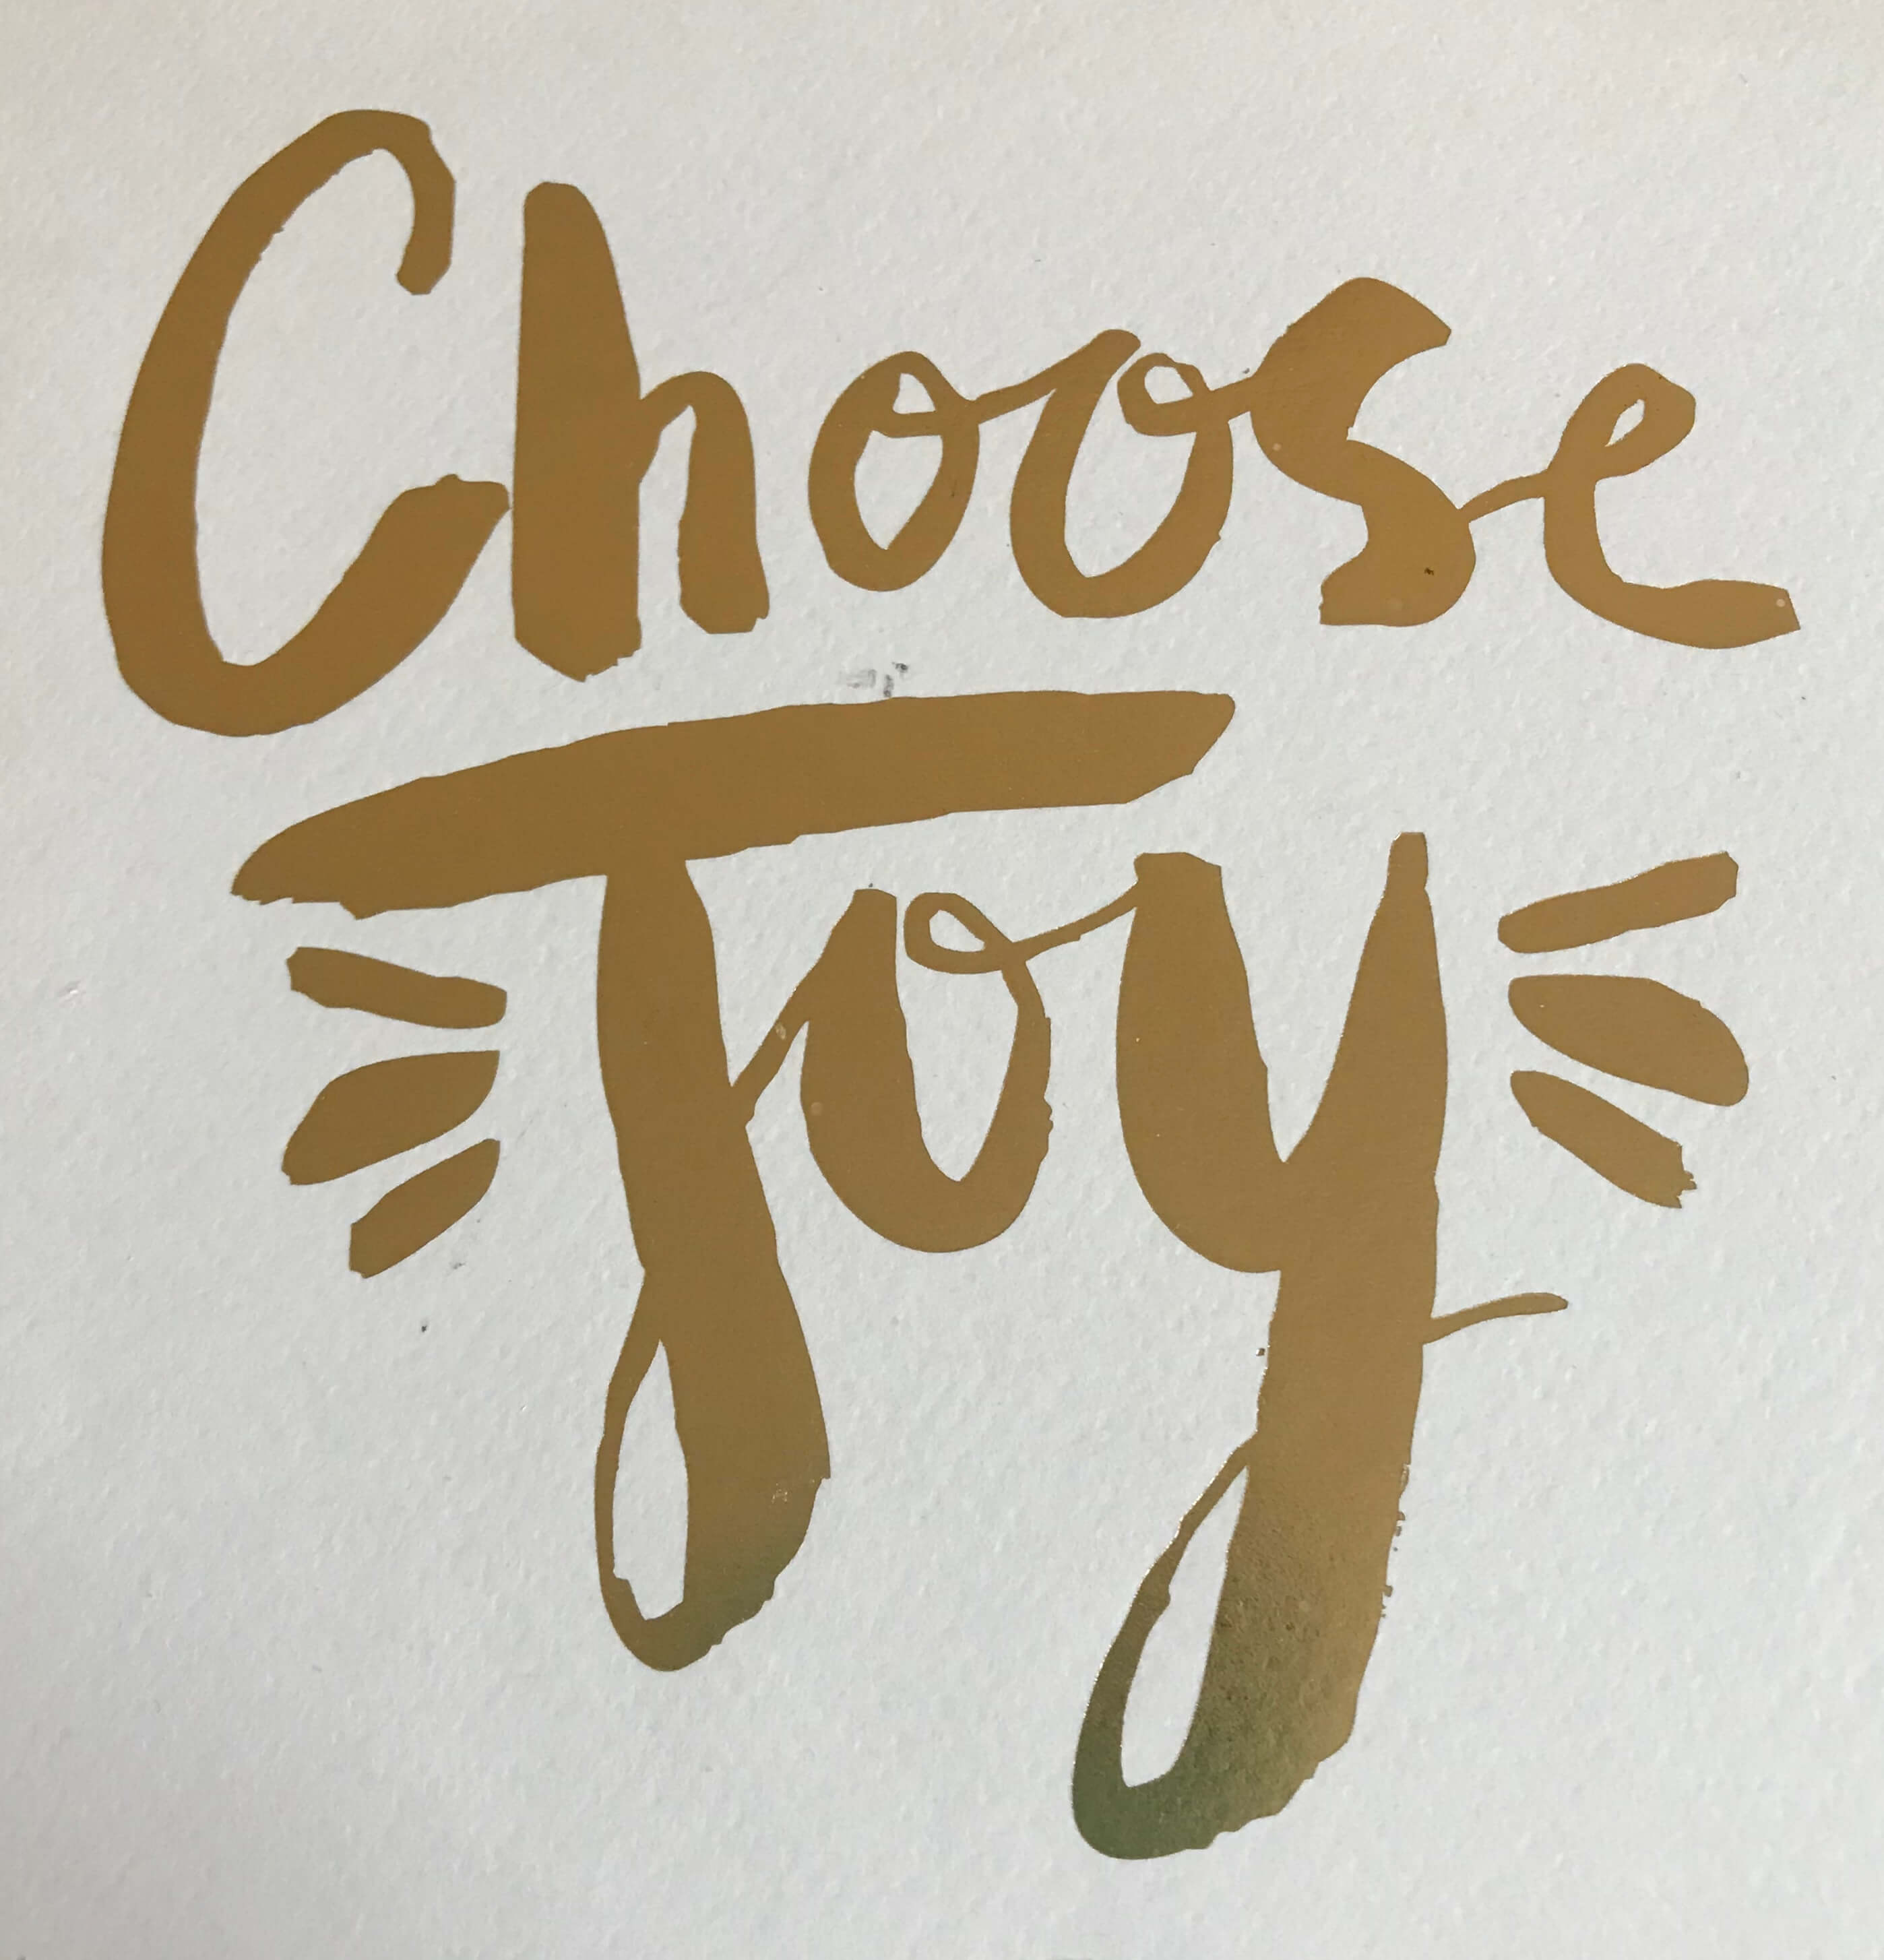 do people change? when they choose joy - yes!